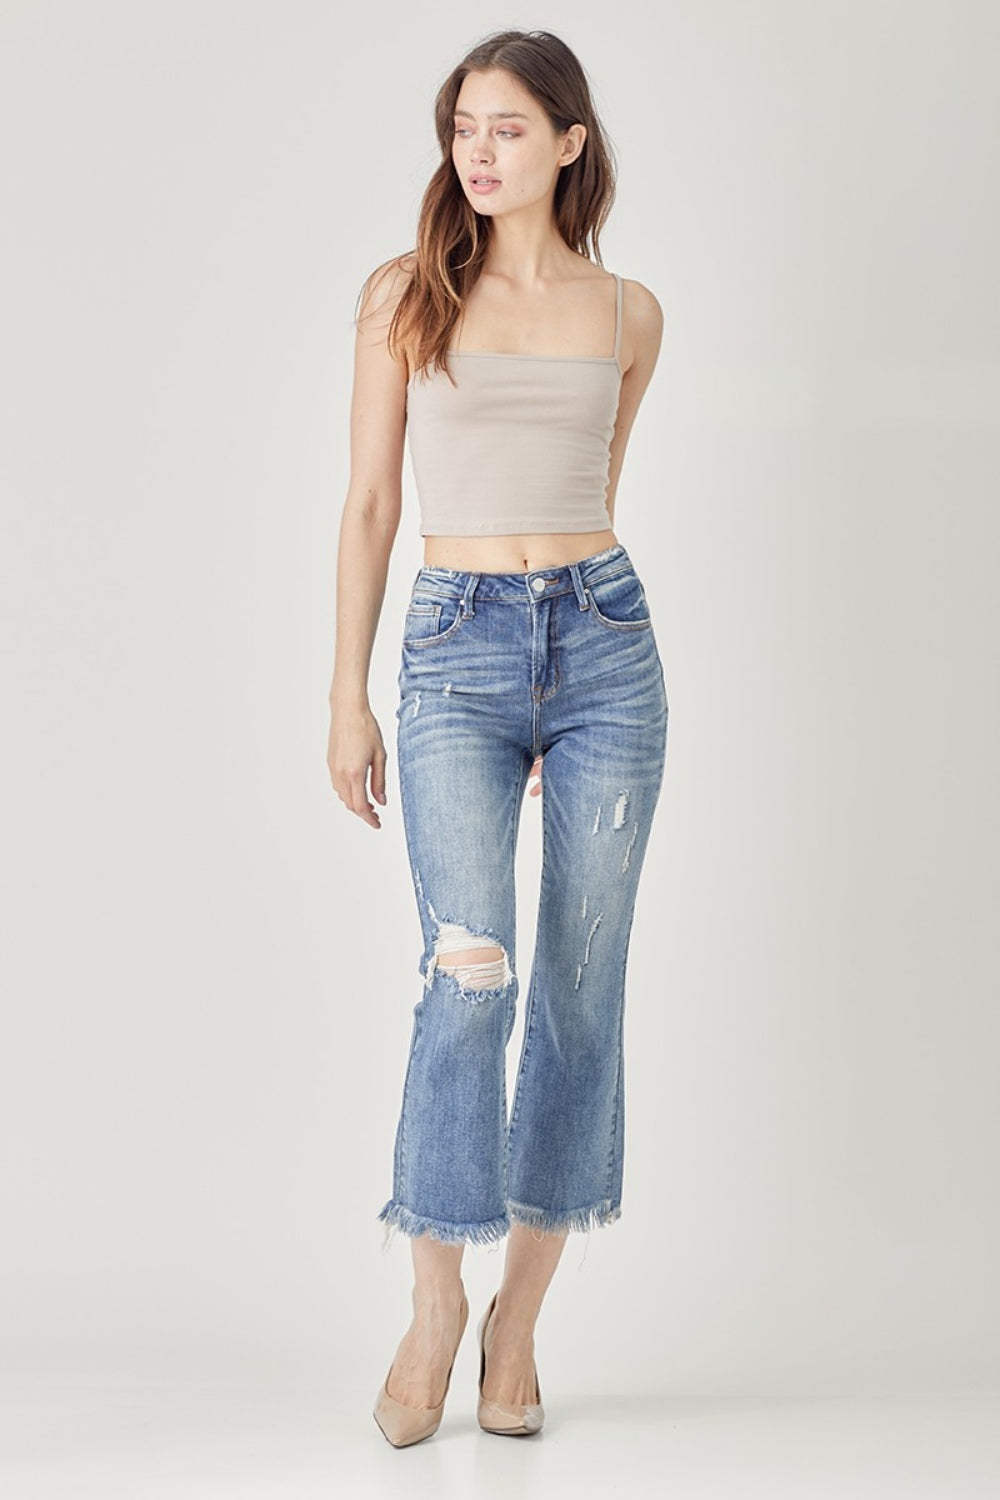 Eva High Waist Distressed Cropped Bootcut Jeans